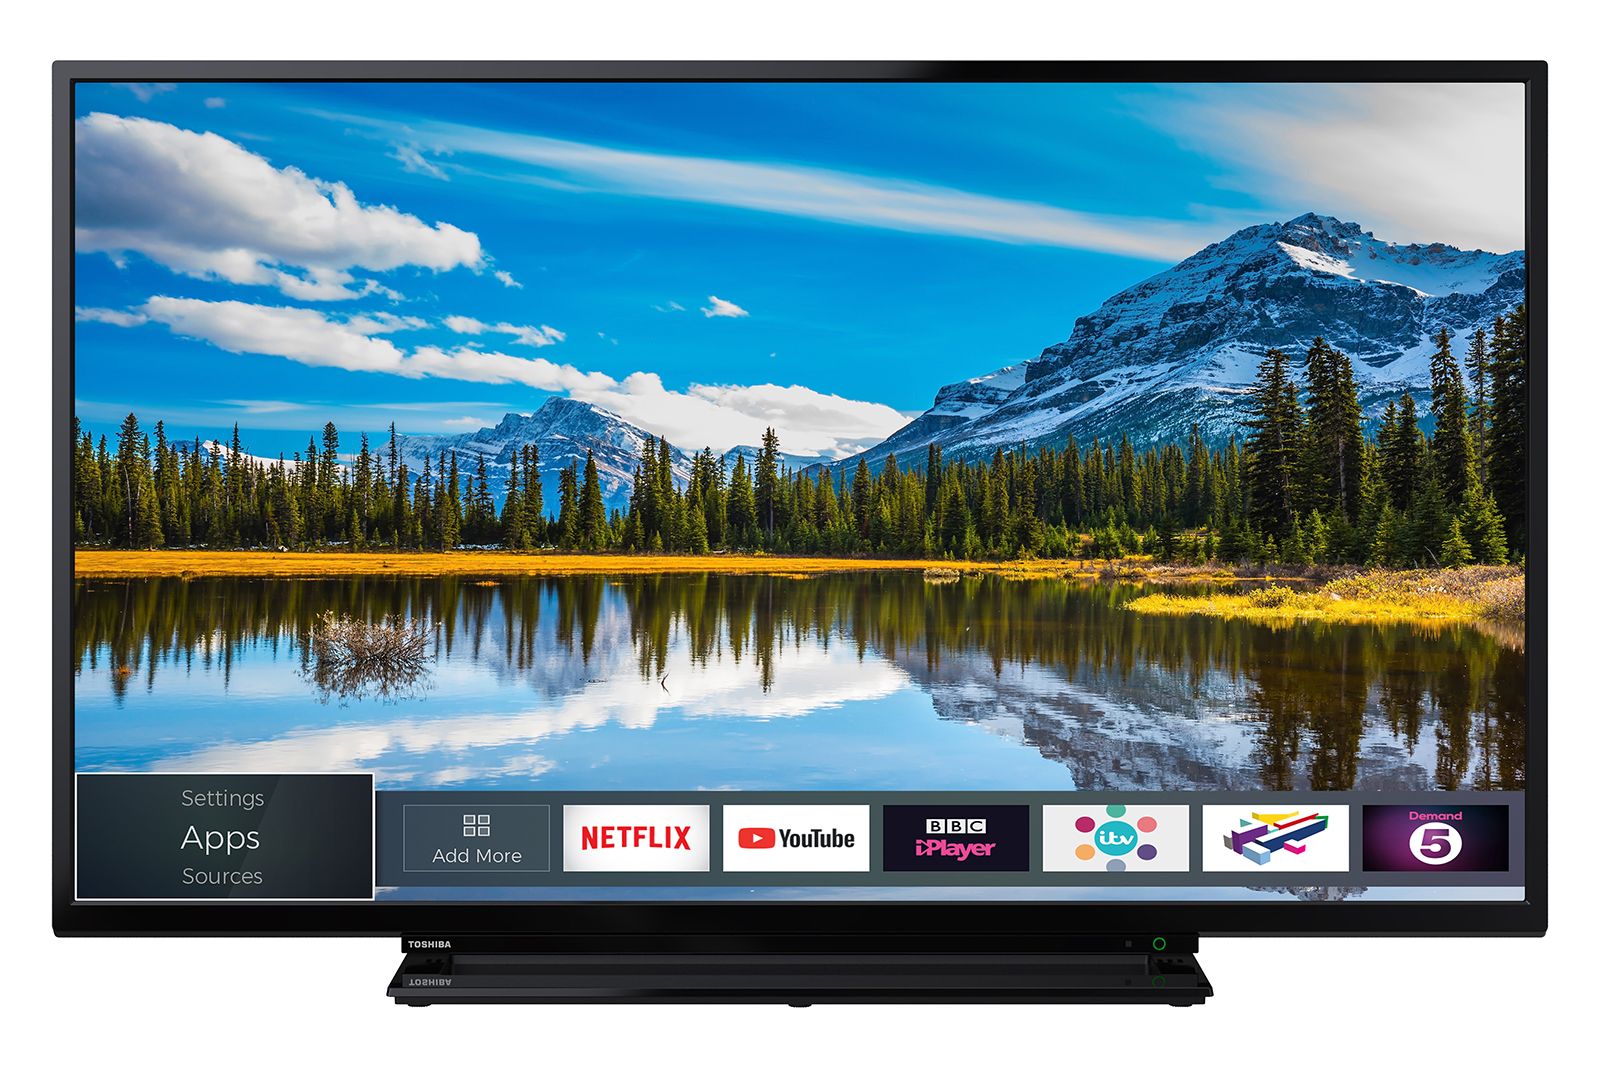 Toshiba Announces 2018 4k Hdr Tv Choices With Oled Dolby Vision And Hlg image 2